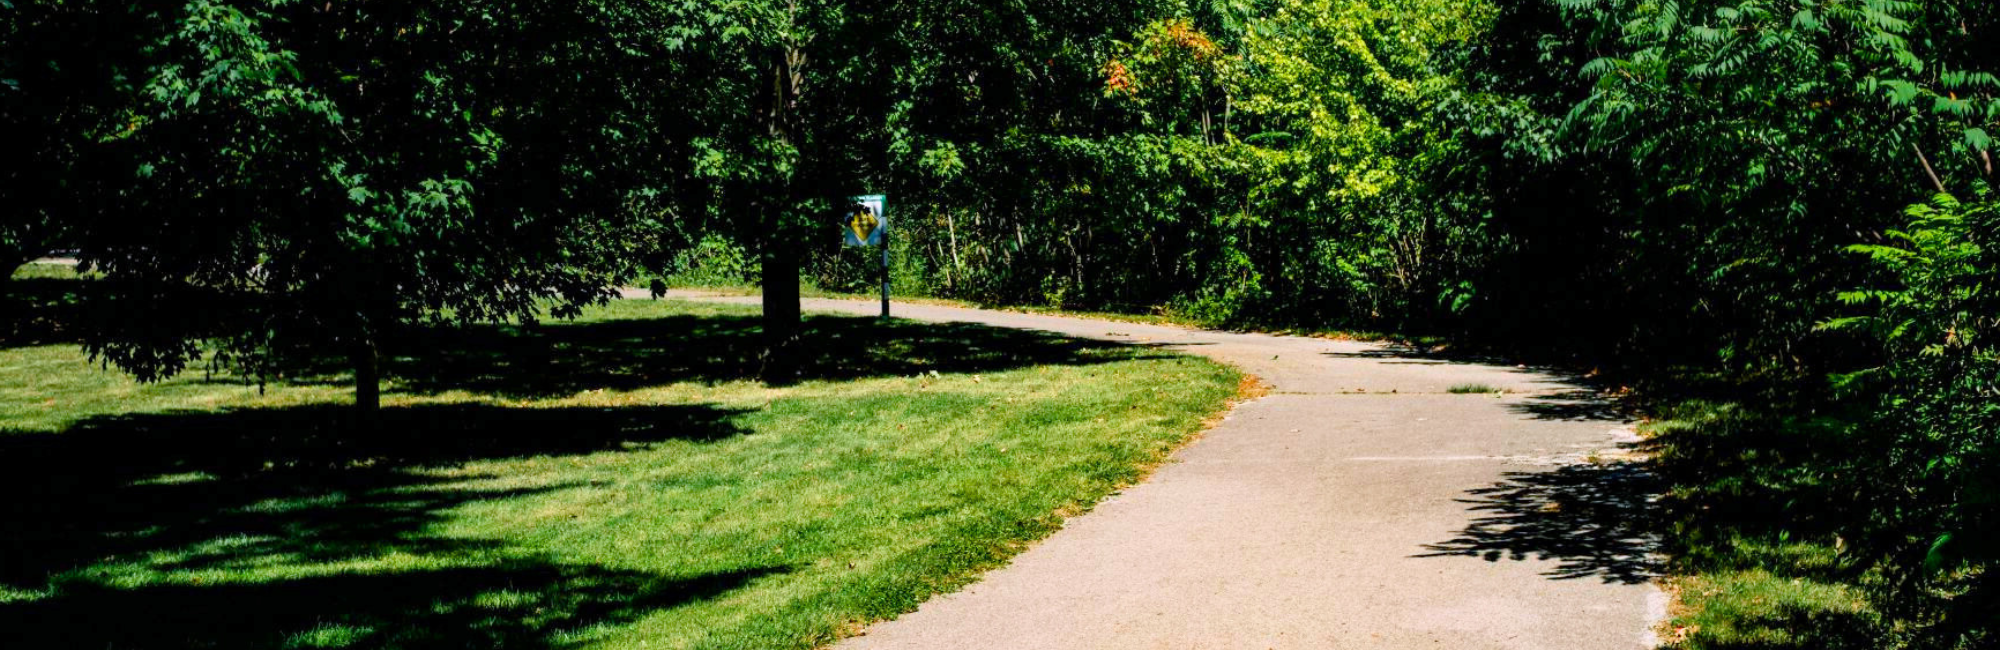 Park with a trail lined with trees